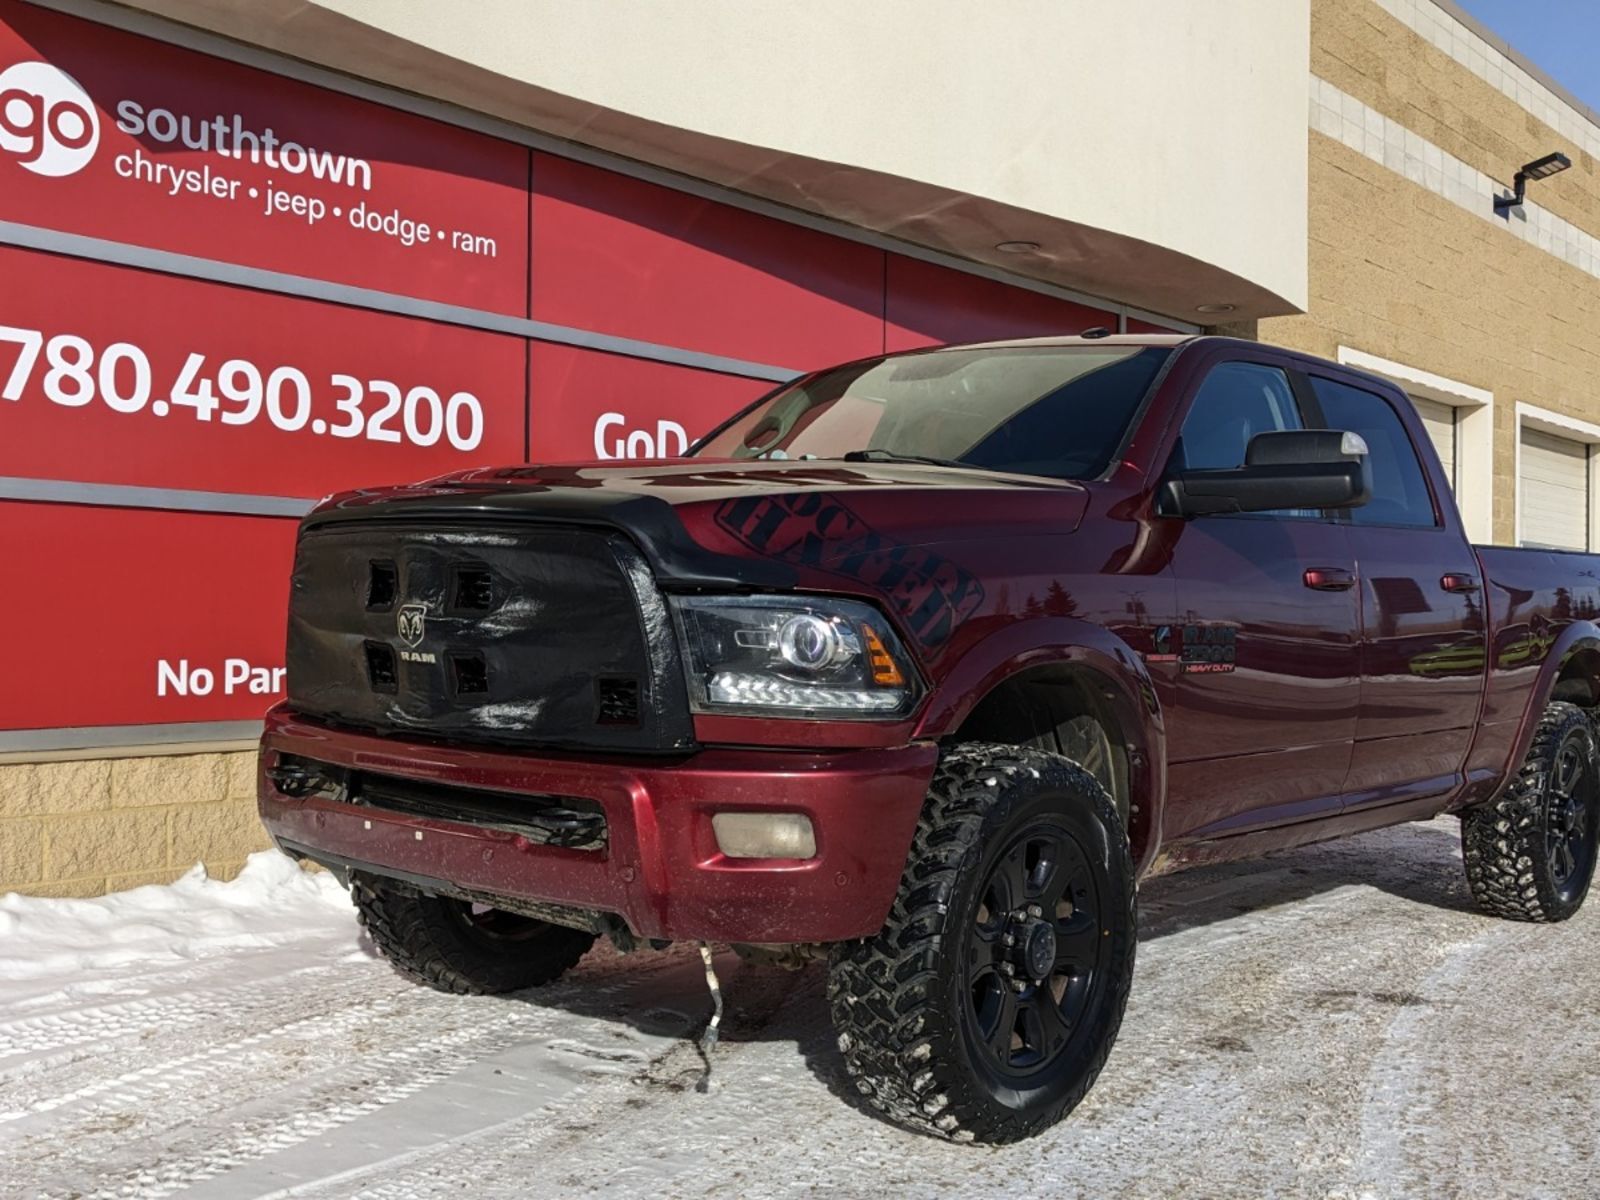 2017 Ram 3500 LARAMIE IN RED PEARL EQUIPPED WITH A 6.7L CUMMINS 